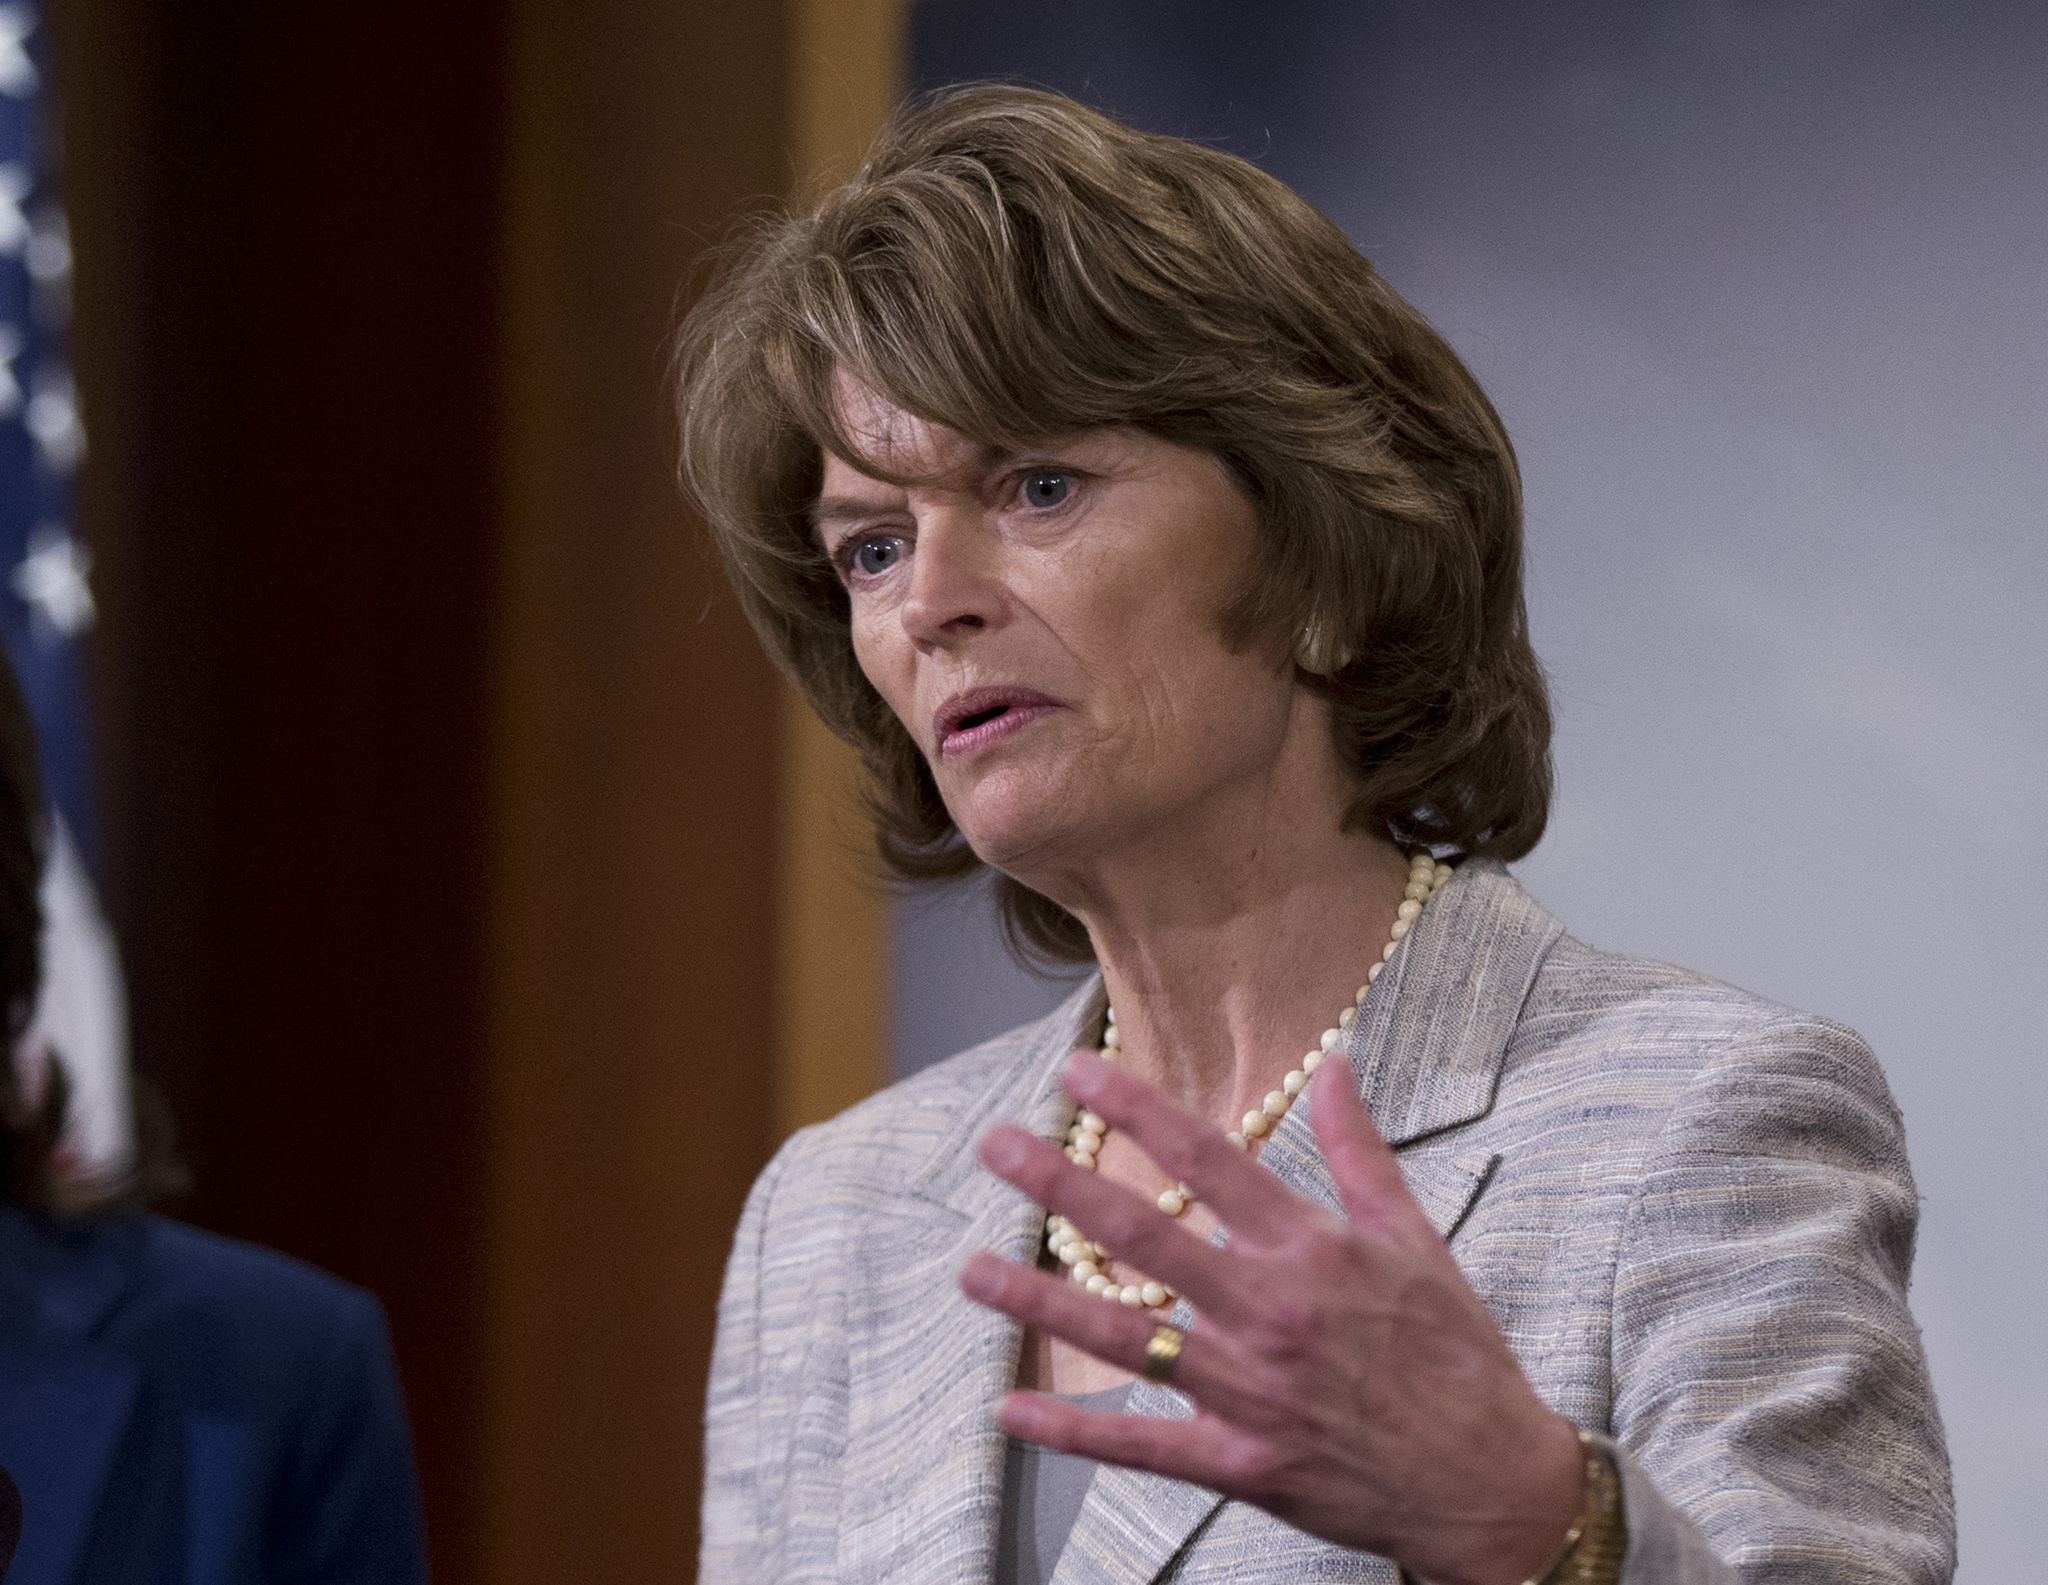 FILE In this April 20, 2016 file photo, Sen. Lisa Murkowski, R-Alaska speaks during a news conference on Capitol Hill in Washington. Betsy DeVos bid to become education secretary could be in trouble. Two Republican senators, Susan Collins of Maine and Lisa Murkowski of Alaska, announced their opposition to DeVos in speeches on the Senate floor Wednesday, Feb. 1, 2017. (AP Photo/Manuel Balce Ceneta, File)